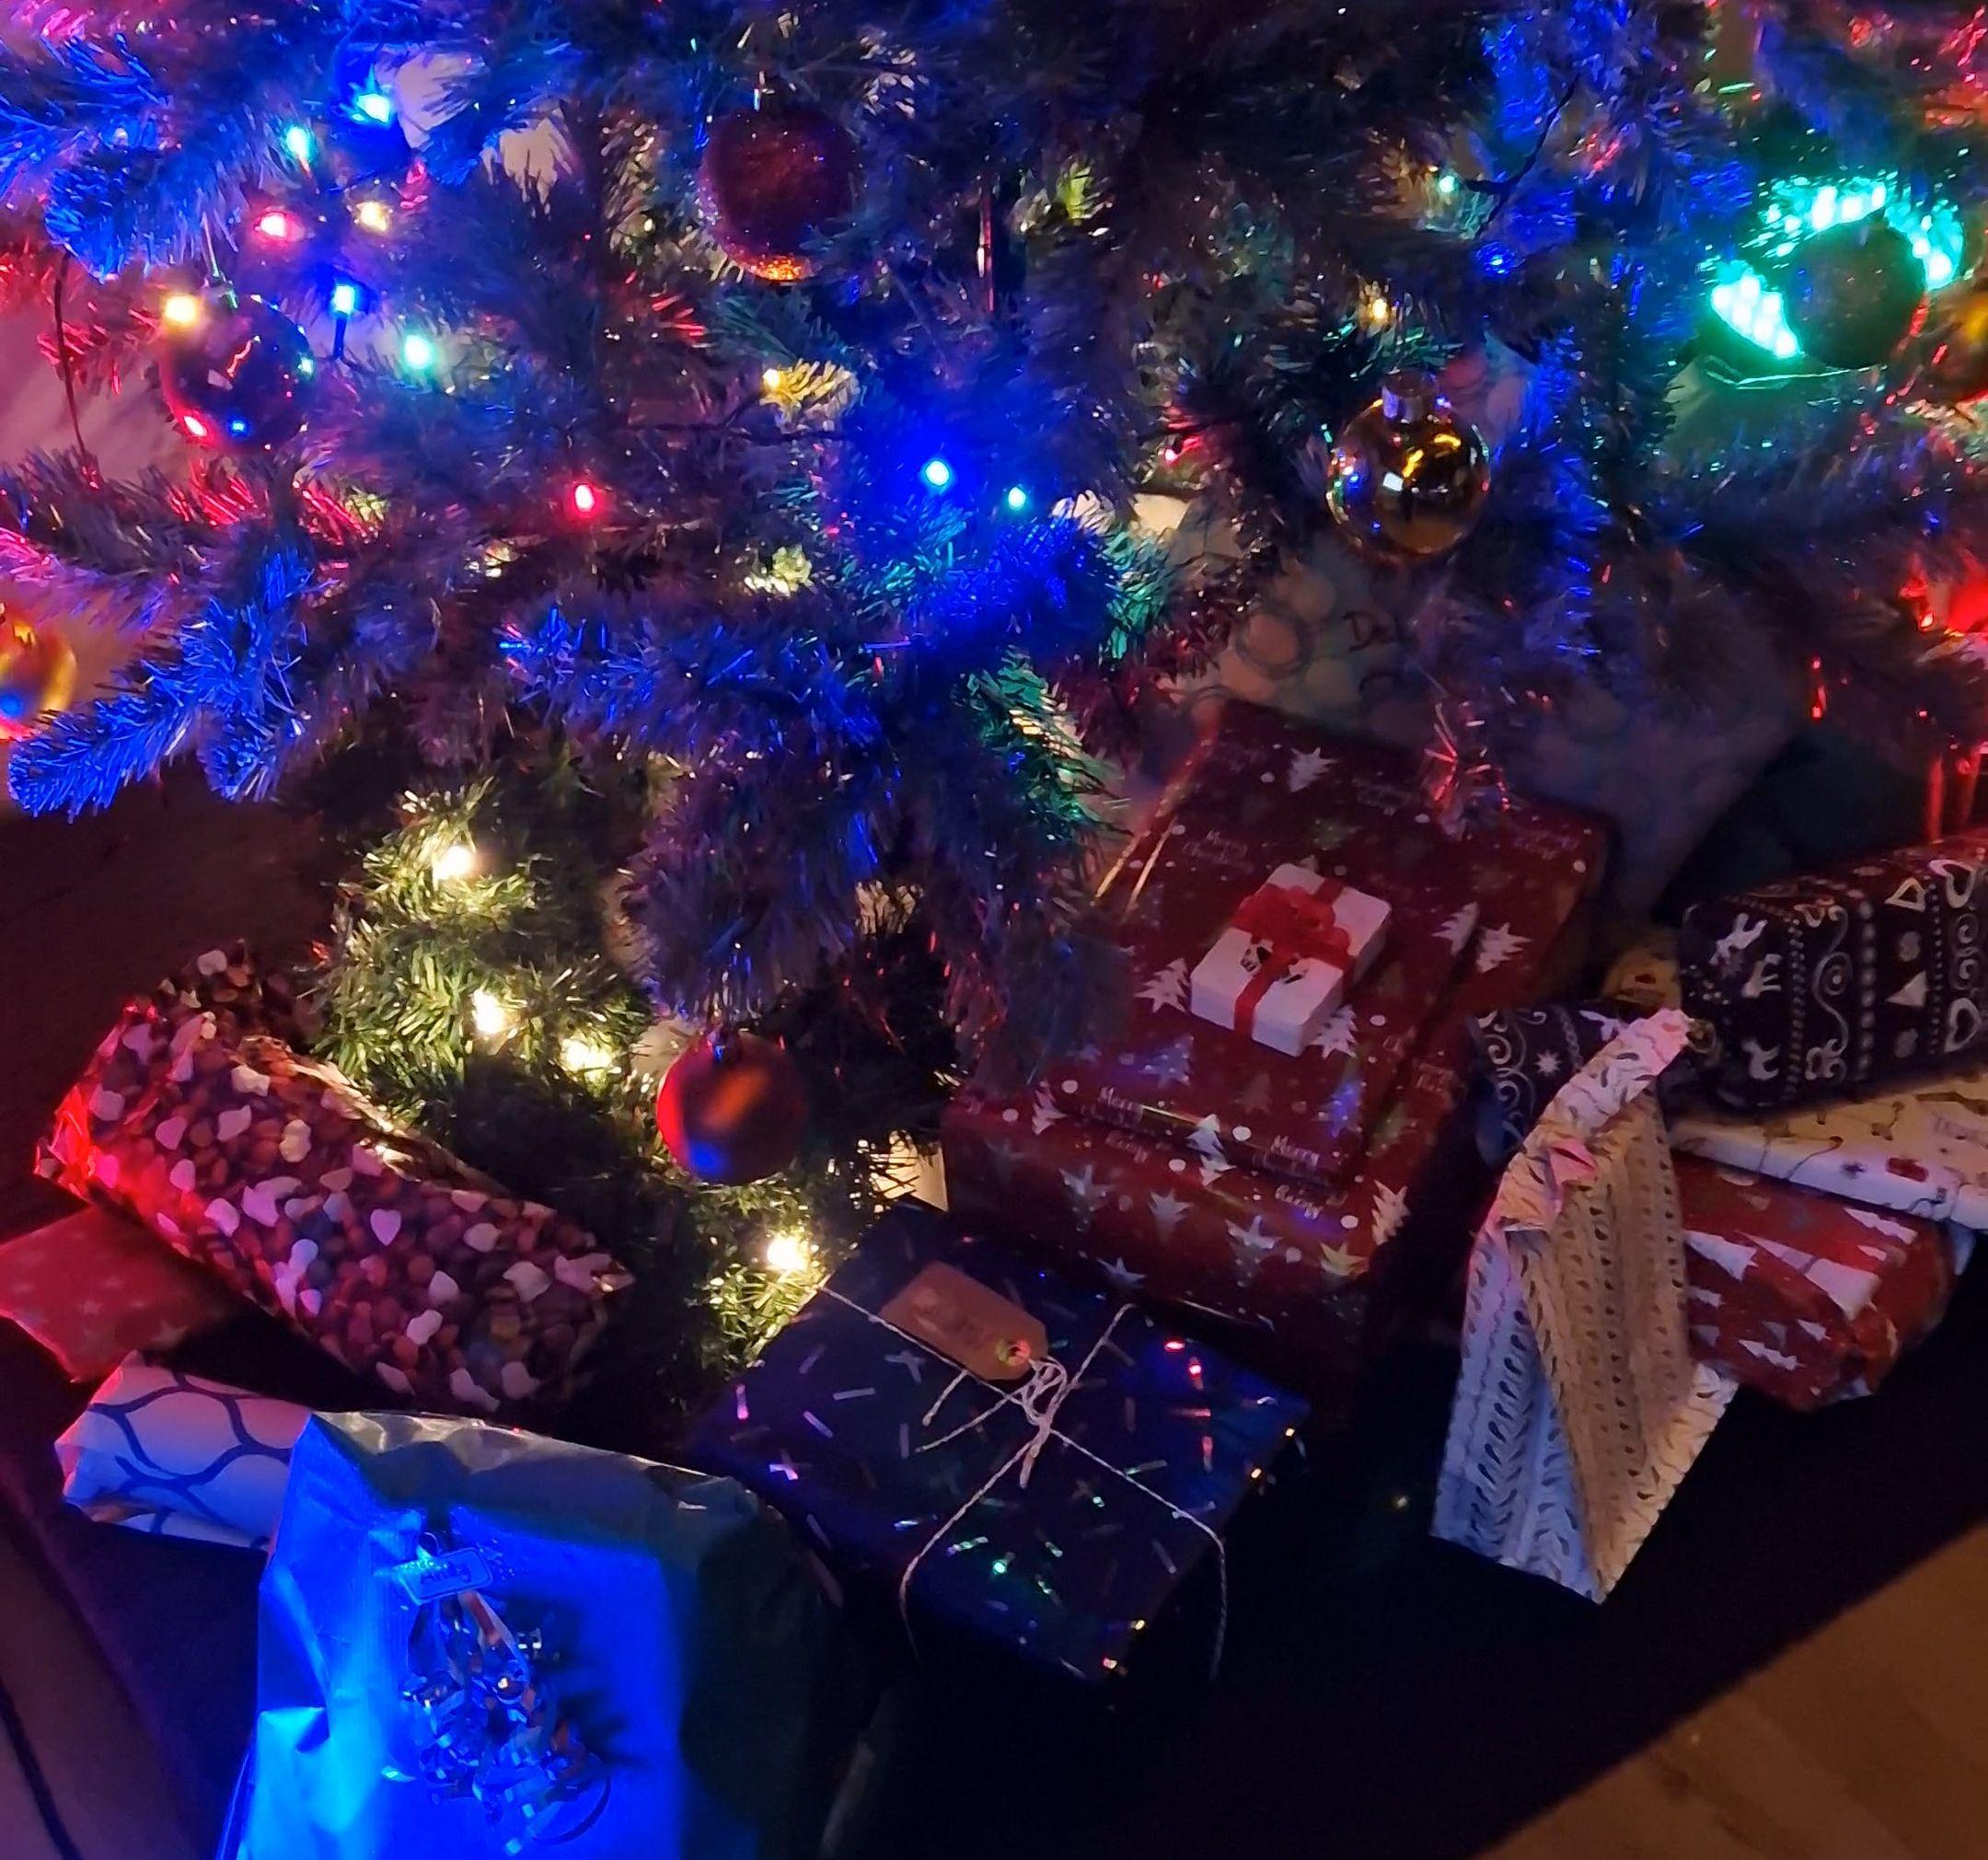 Gifts under the Christmas tree